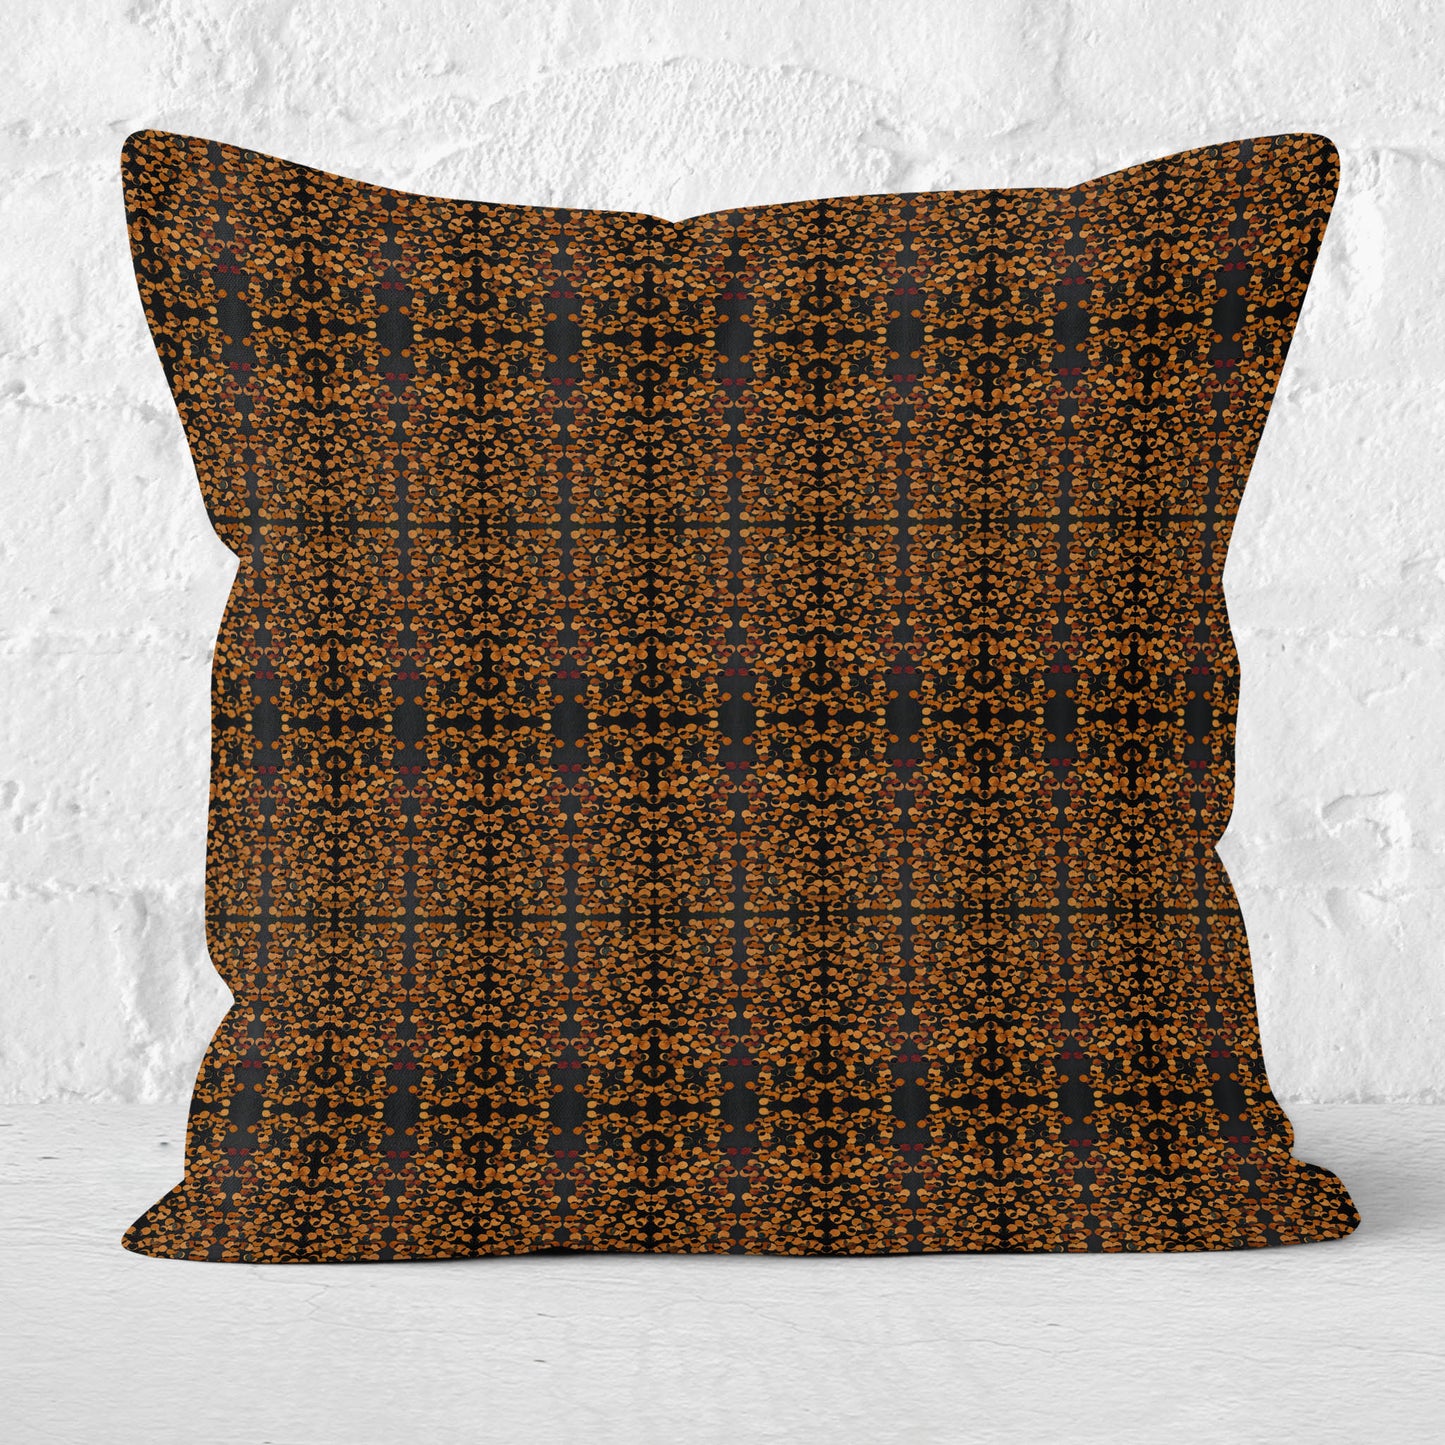 Square throw pillow featuring a hand-pattern in black and copper tones with white brick wall in background